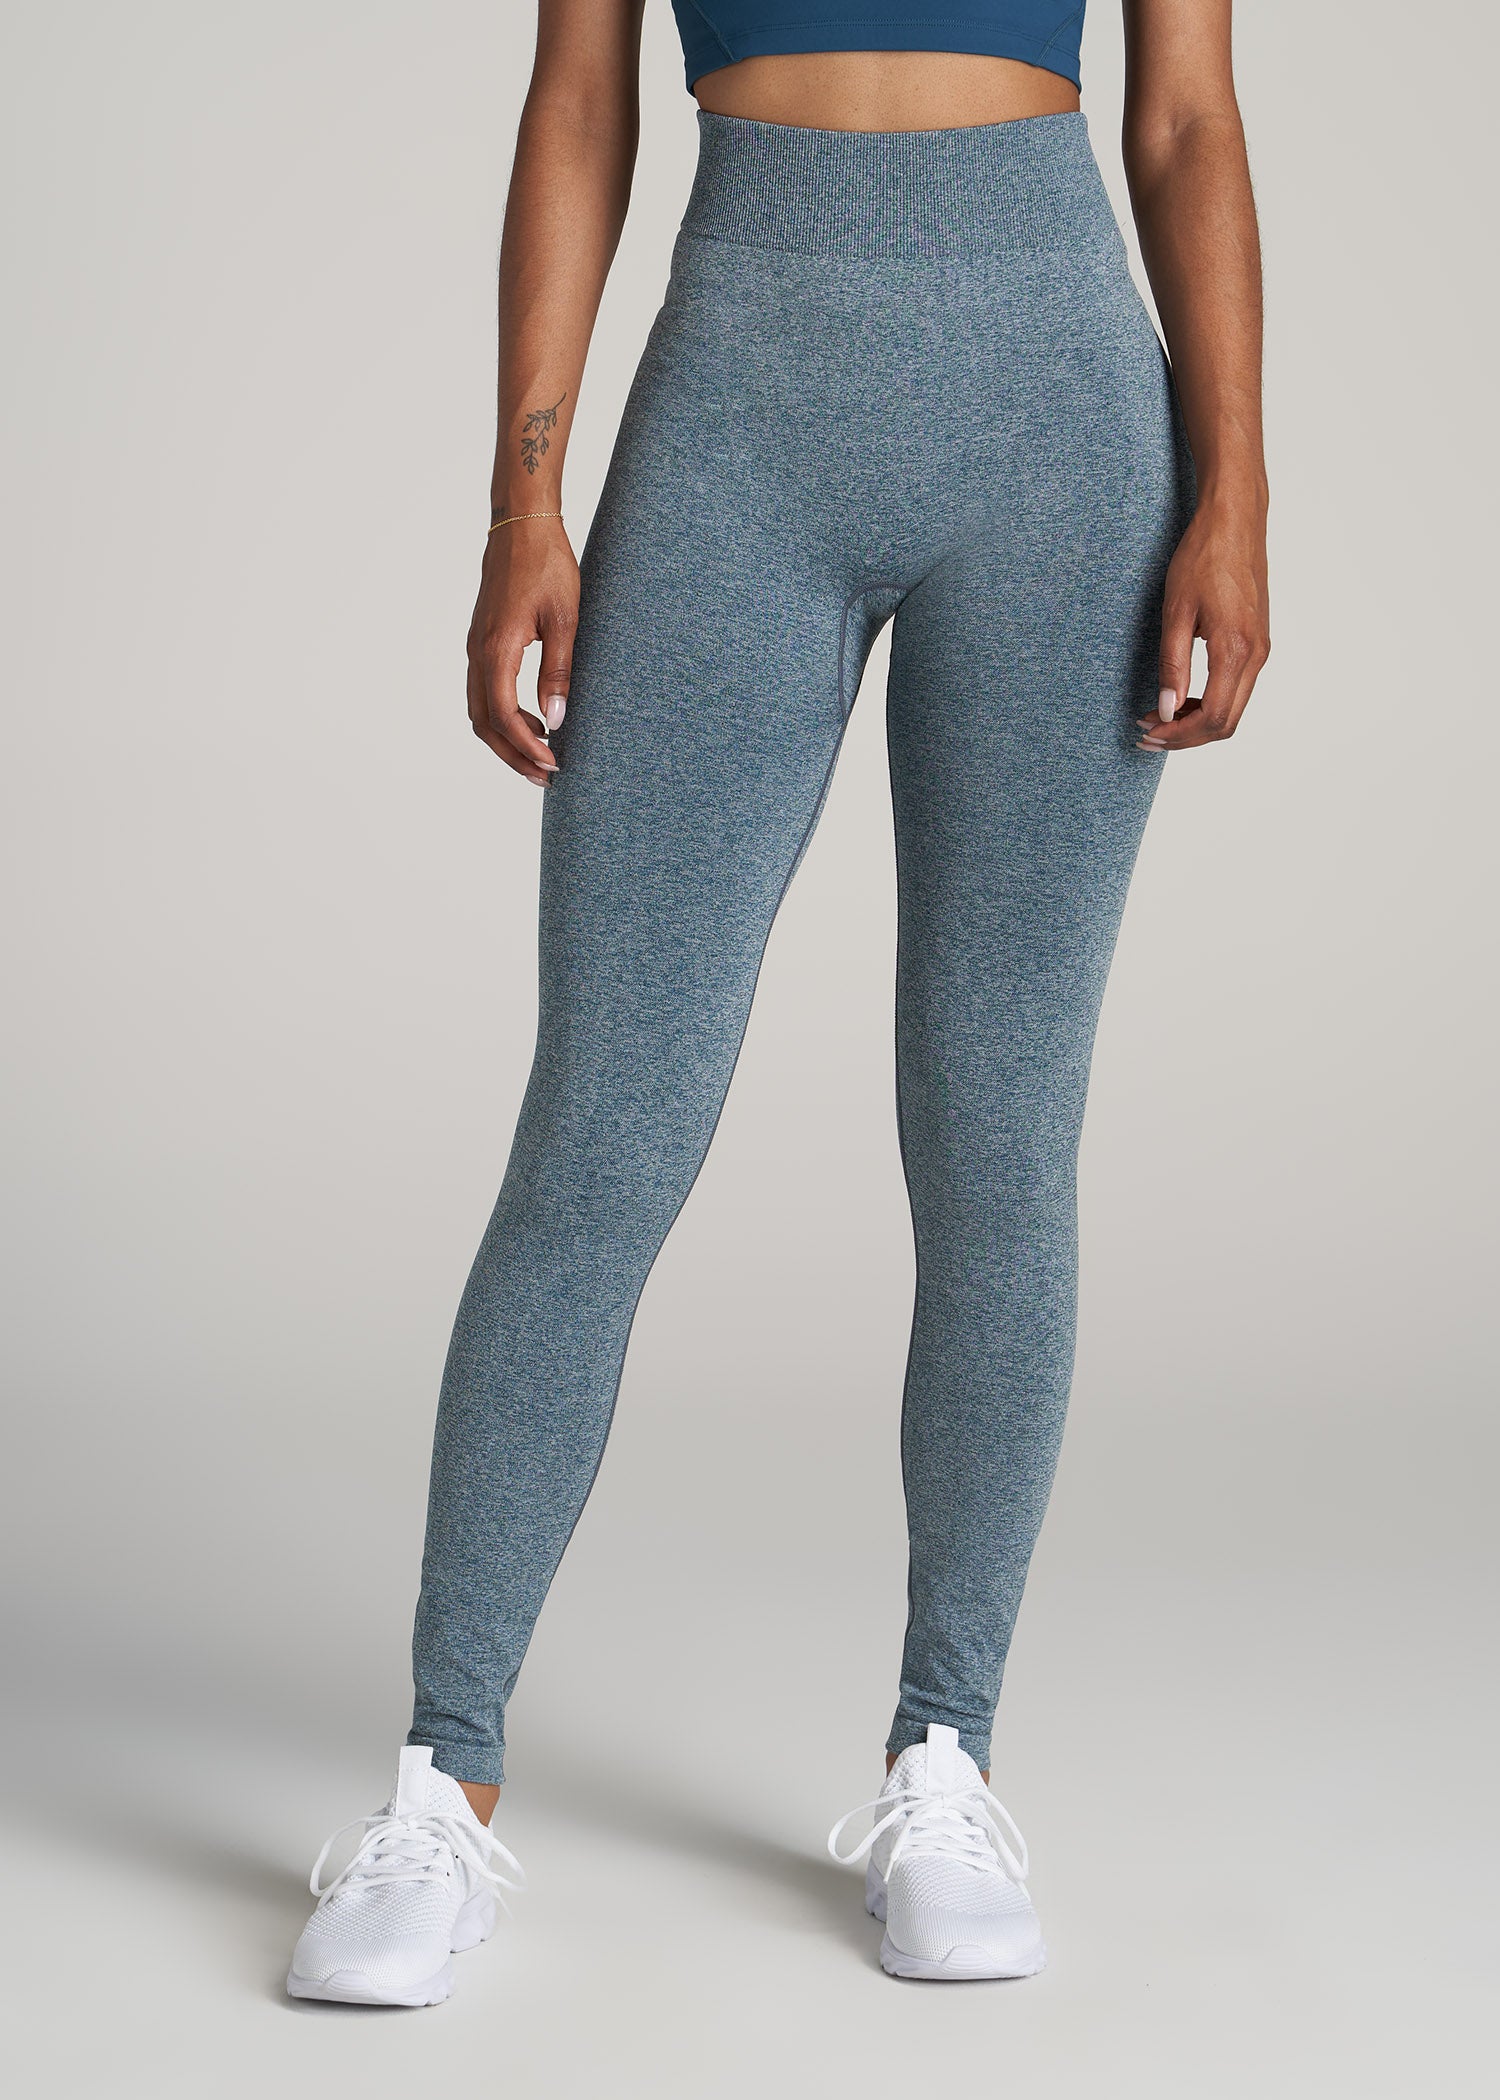 lululemon Holiday Wish List (gifts for every occasion!) - Fit Foodie Finds